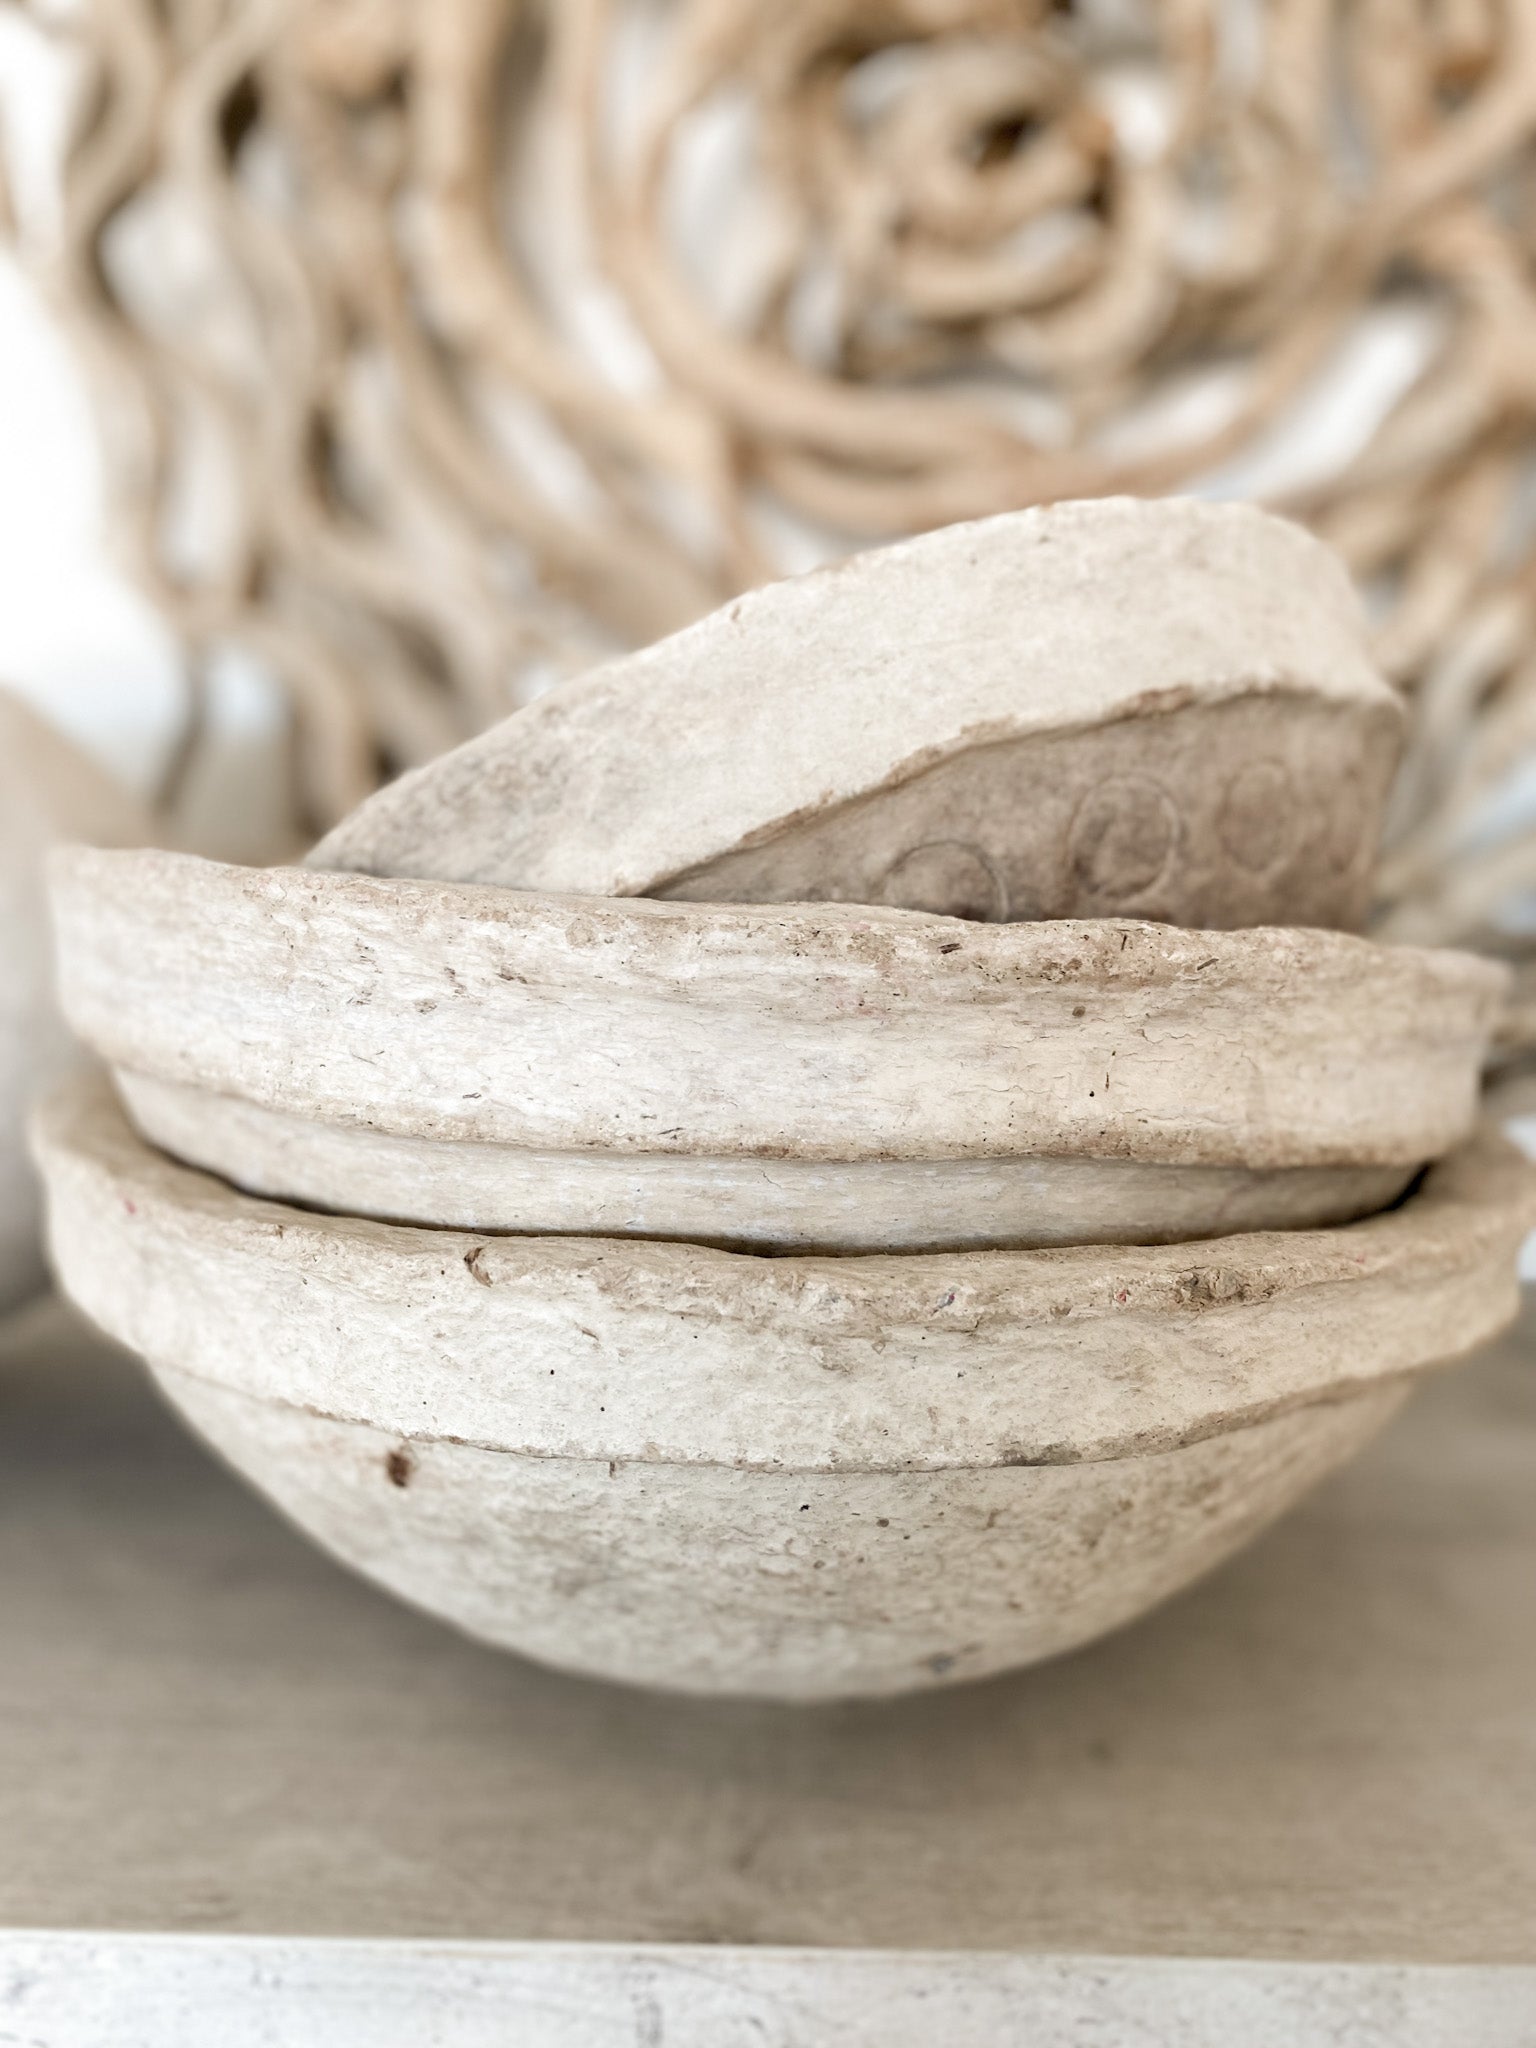 Bowls and Mortars: A Curated Selection of Wood Bowls, Stone and Decorative Bowls for Your Home - Debra Hall Lifestyle